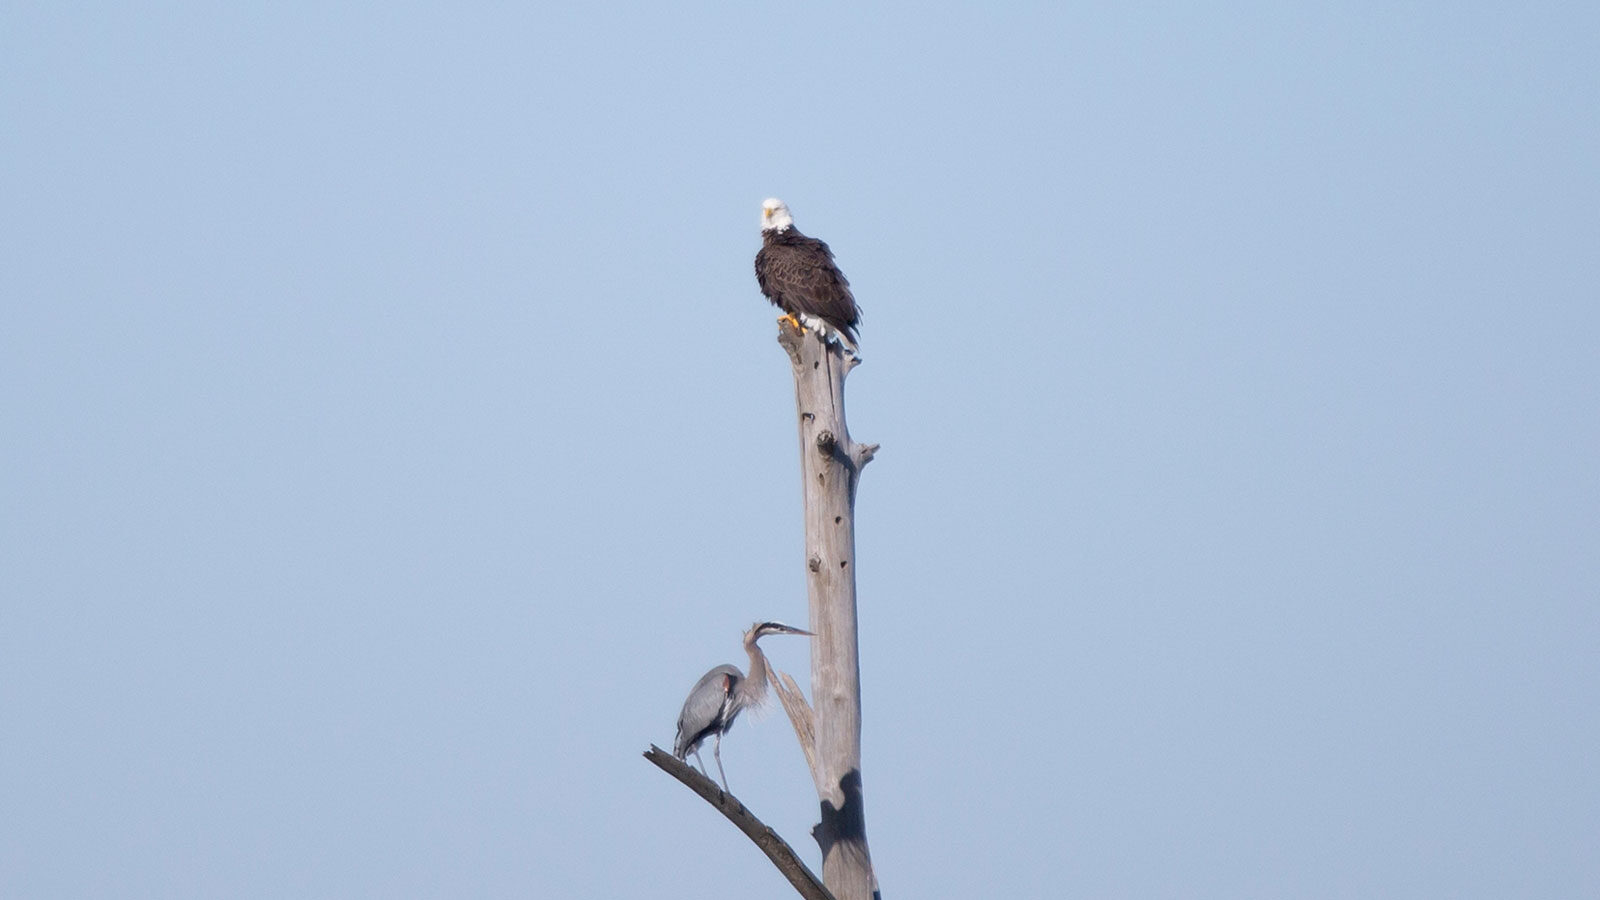 Great blue heron on a tree with a bald eagle